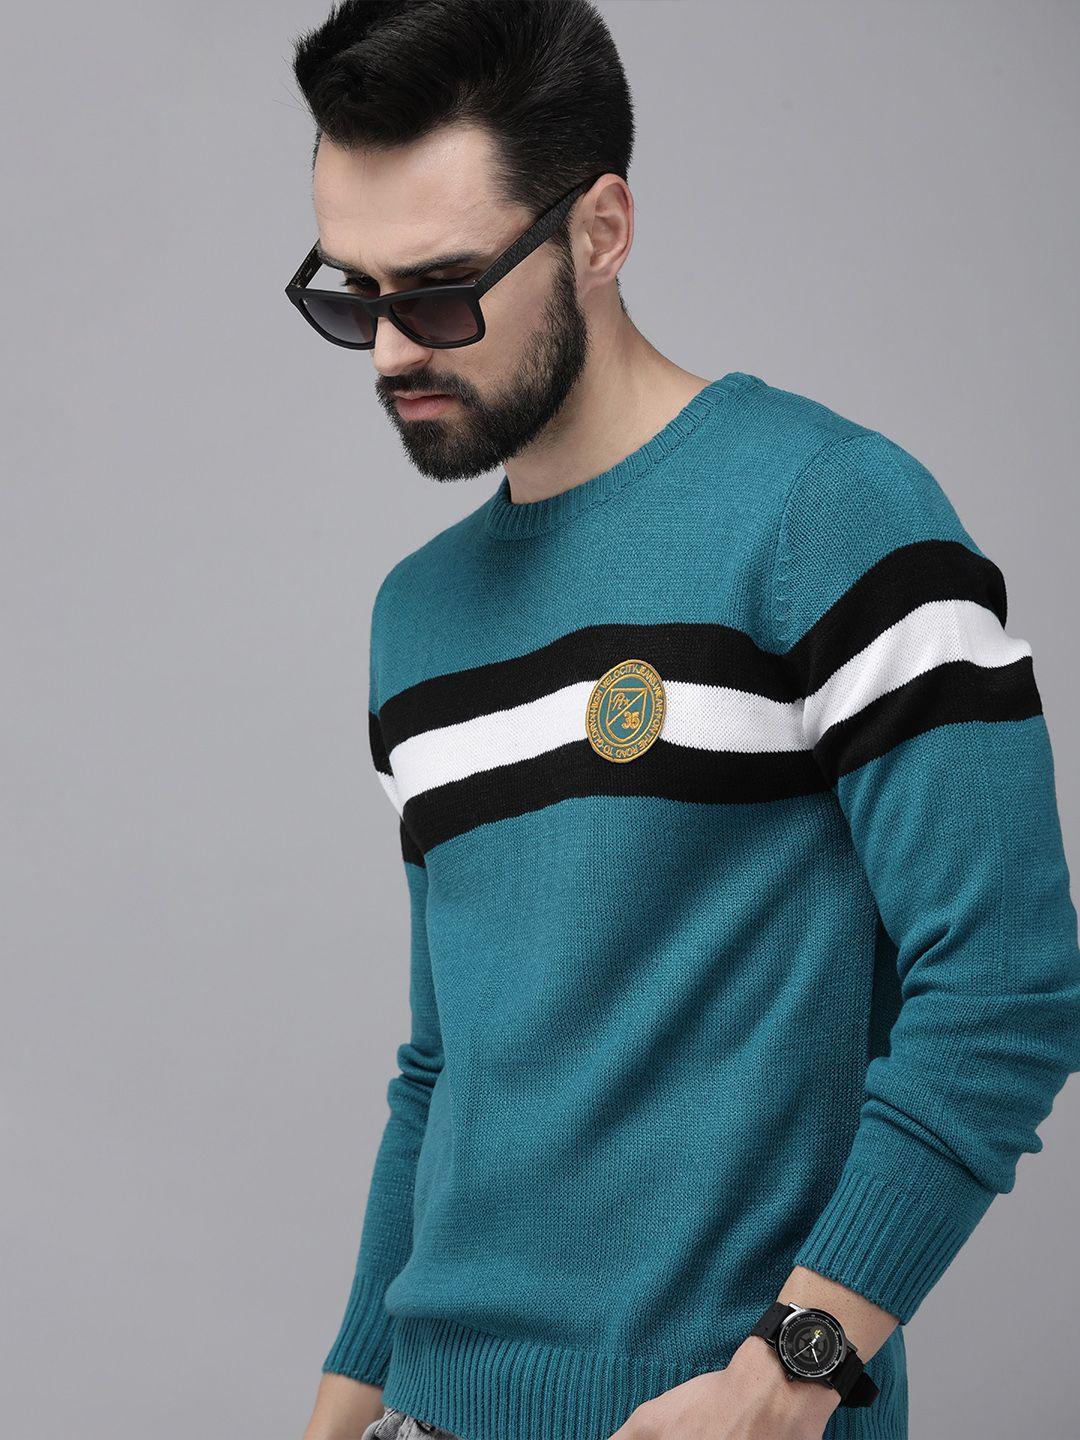 roadster men teal blue & black colourblocked acrylic pullover with applique detail